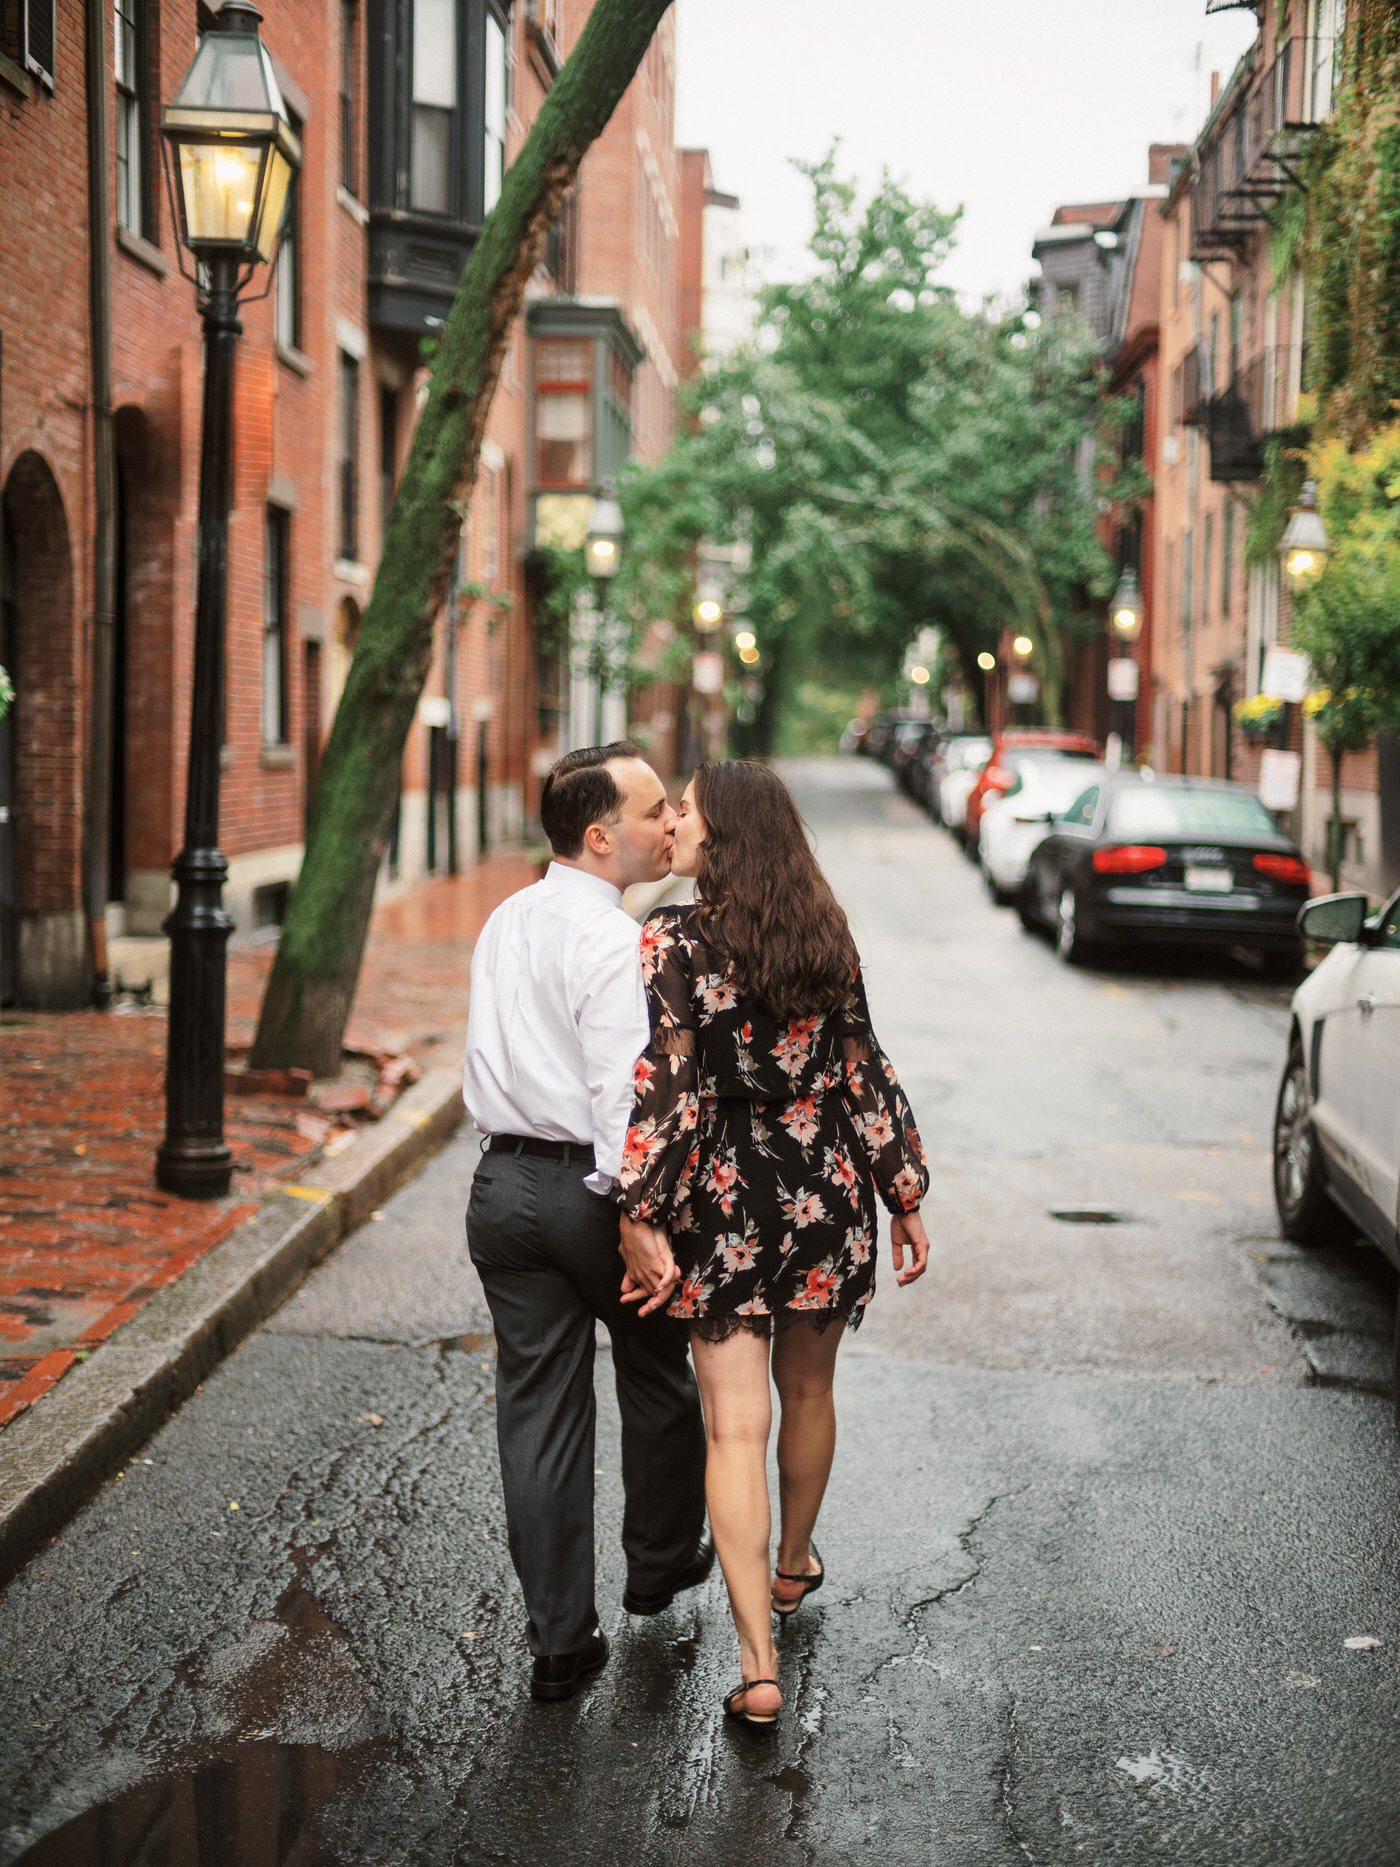 105-engagement-session-in-historic-beacon-hill-boston-by-top-fine-art-photographer.jpg